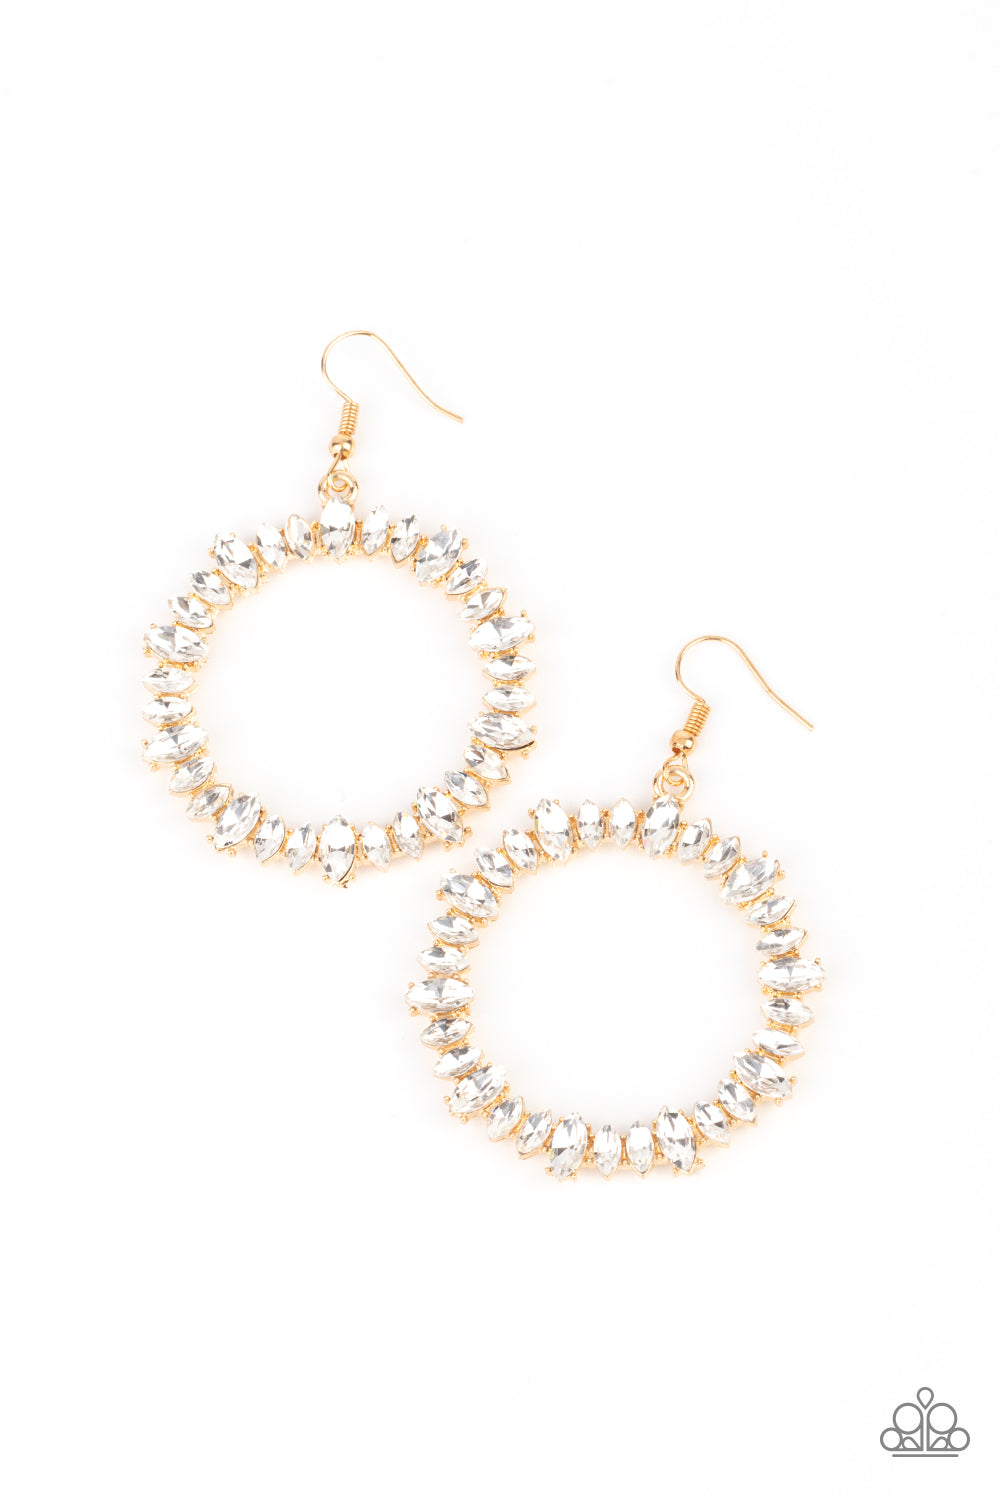 Glowing Reviews Gold Earring - Paparazzi Accessories  Encased in gold pronged fittings, an incandescent array of white marquise cut rhinestones delicately coalesce into a glowing hoop. Earring attaches to a standard fishhook fitting.  All Paparazzi Accessories are lead free and nickel free!  Sold as one pair of earrings.